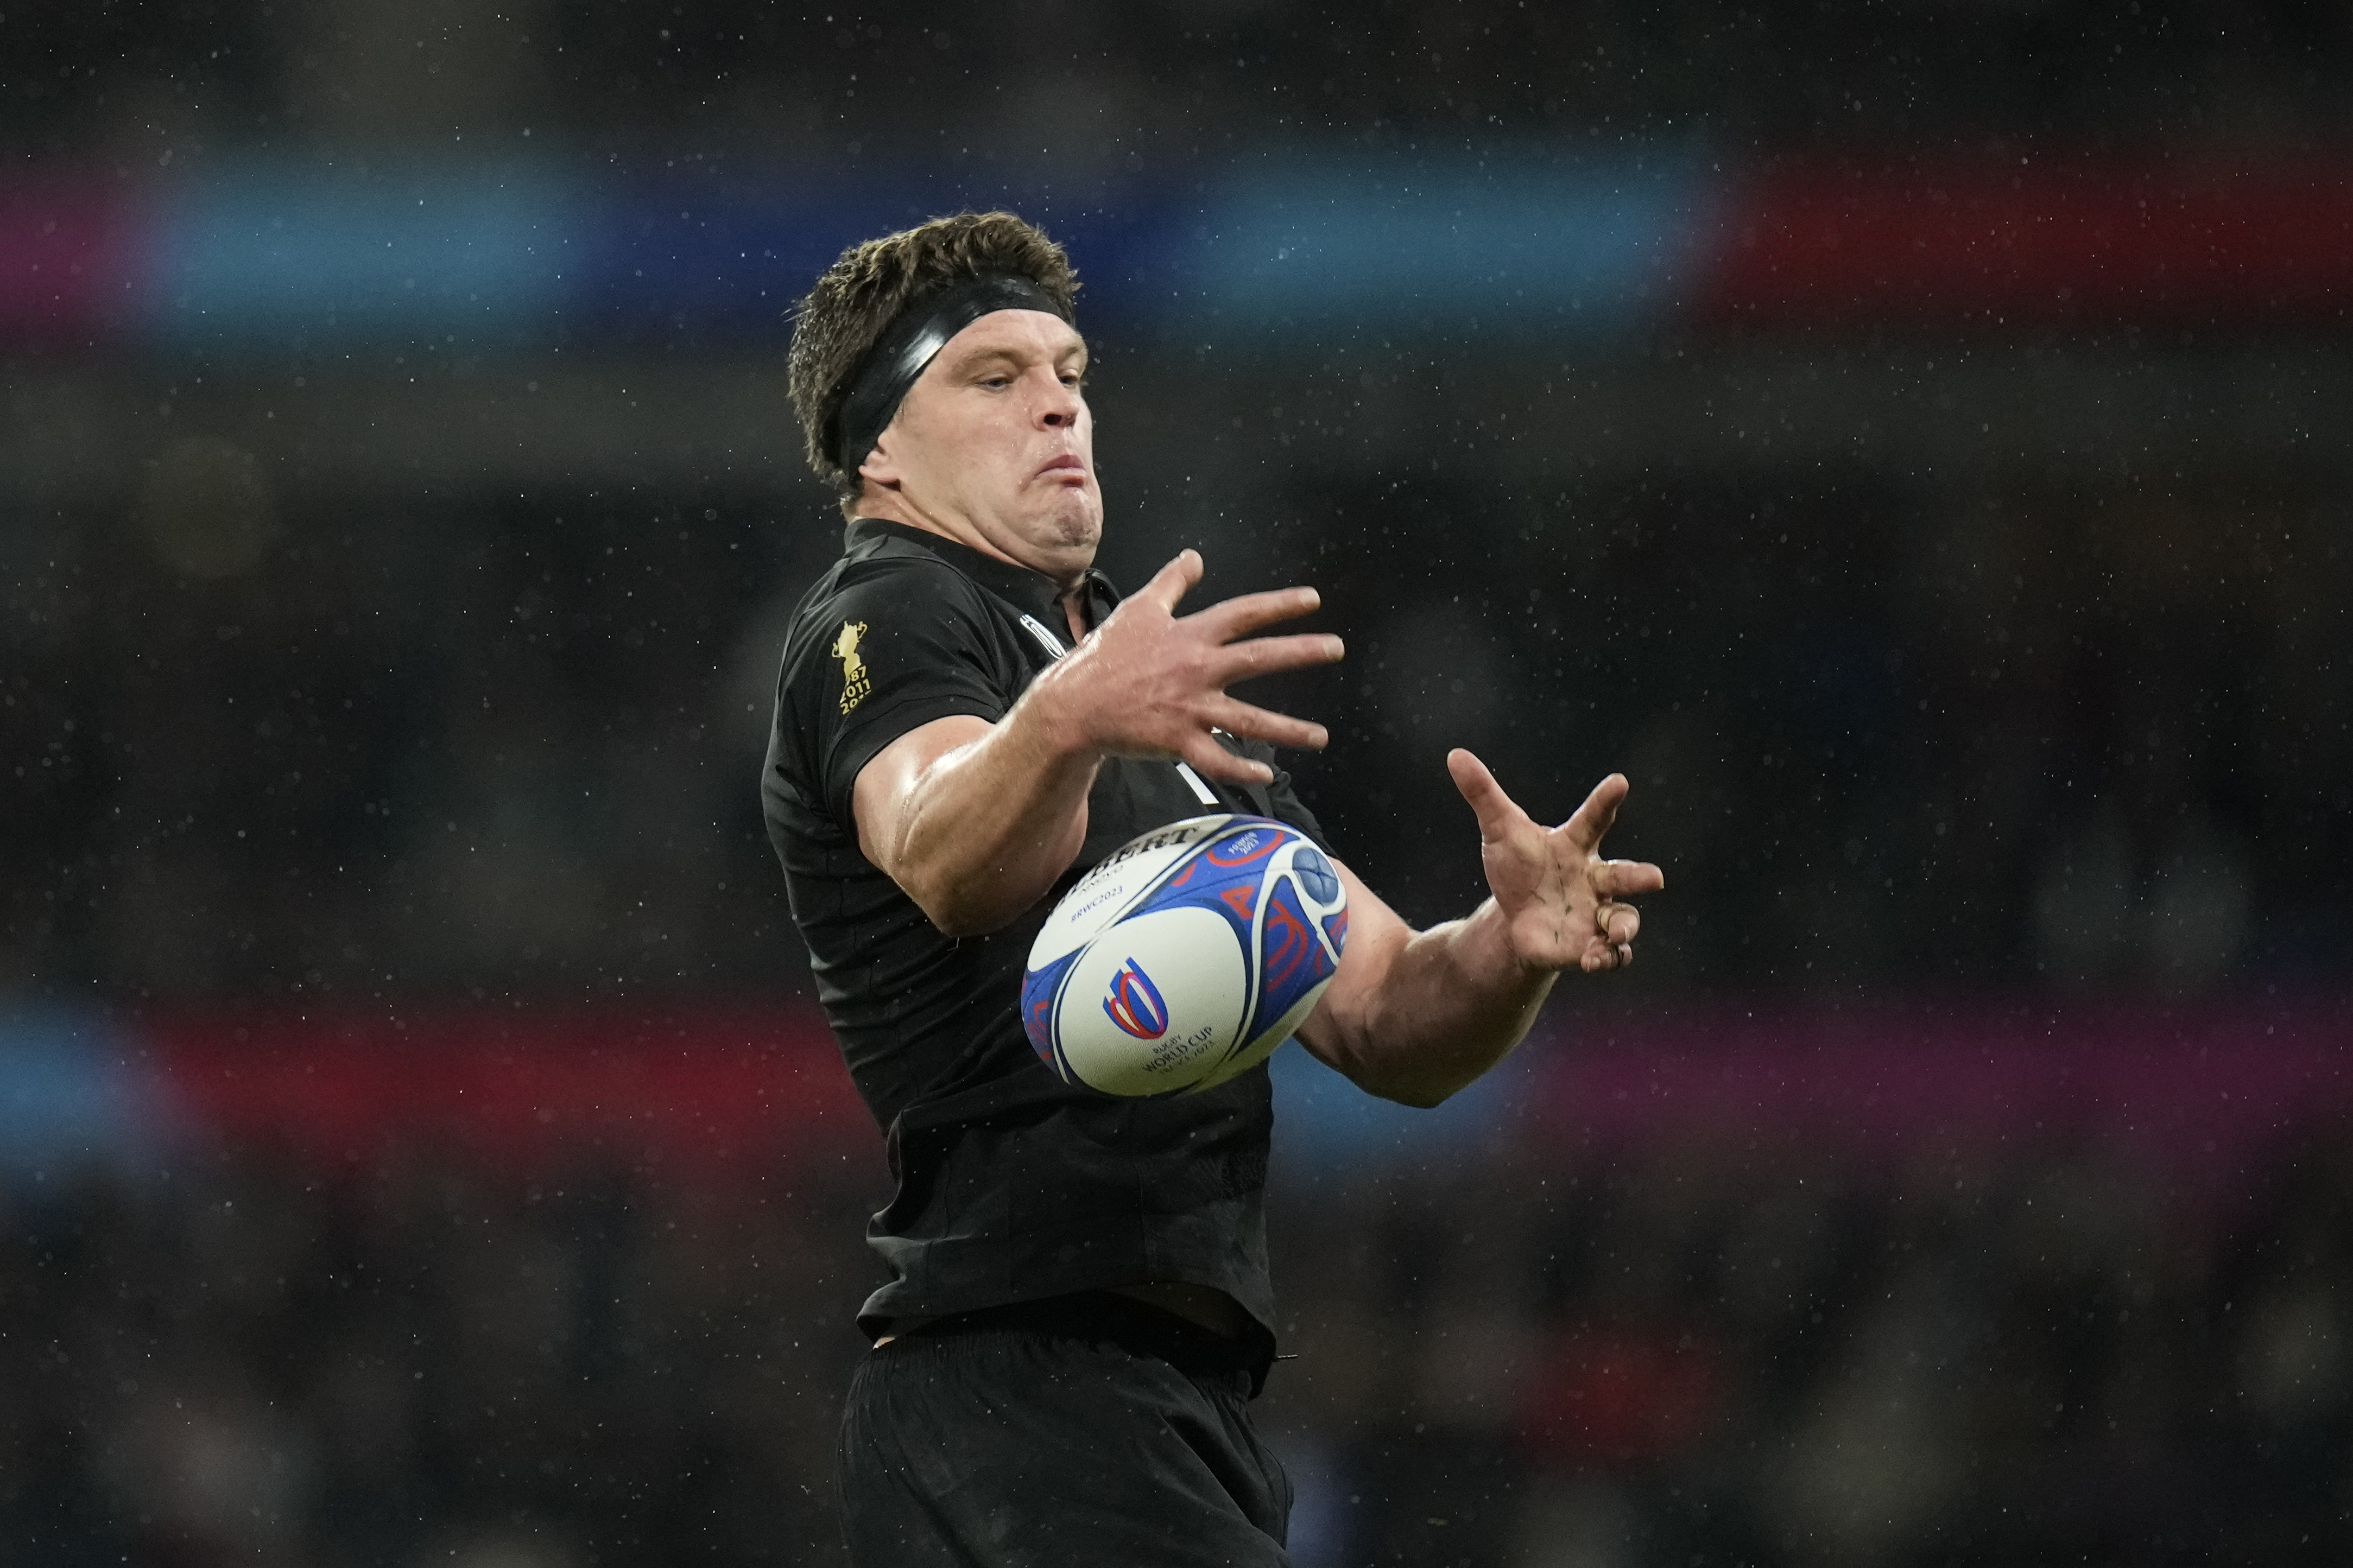 FILE- New Zealand's Scott Barrett takes the ball in a line out during the Rugby World Cup final match between New Zealand and South Africa at the Stade de France in Saint-Denis, near Paris, Oct. 28, 2023. New All Blacks head coach Scott Robertson has chosen Scott Barrett as his first captain, to lead a 32-man squad he named Monday in tests against England and Fiji. (AP Photo/Christophe Ena, File)